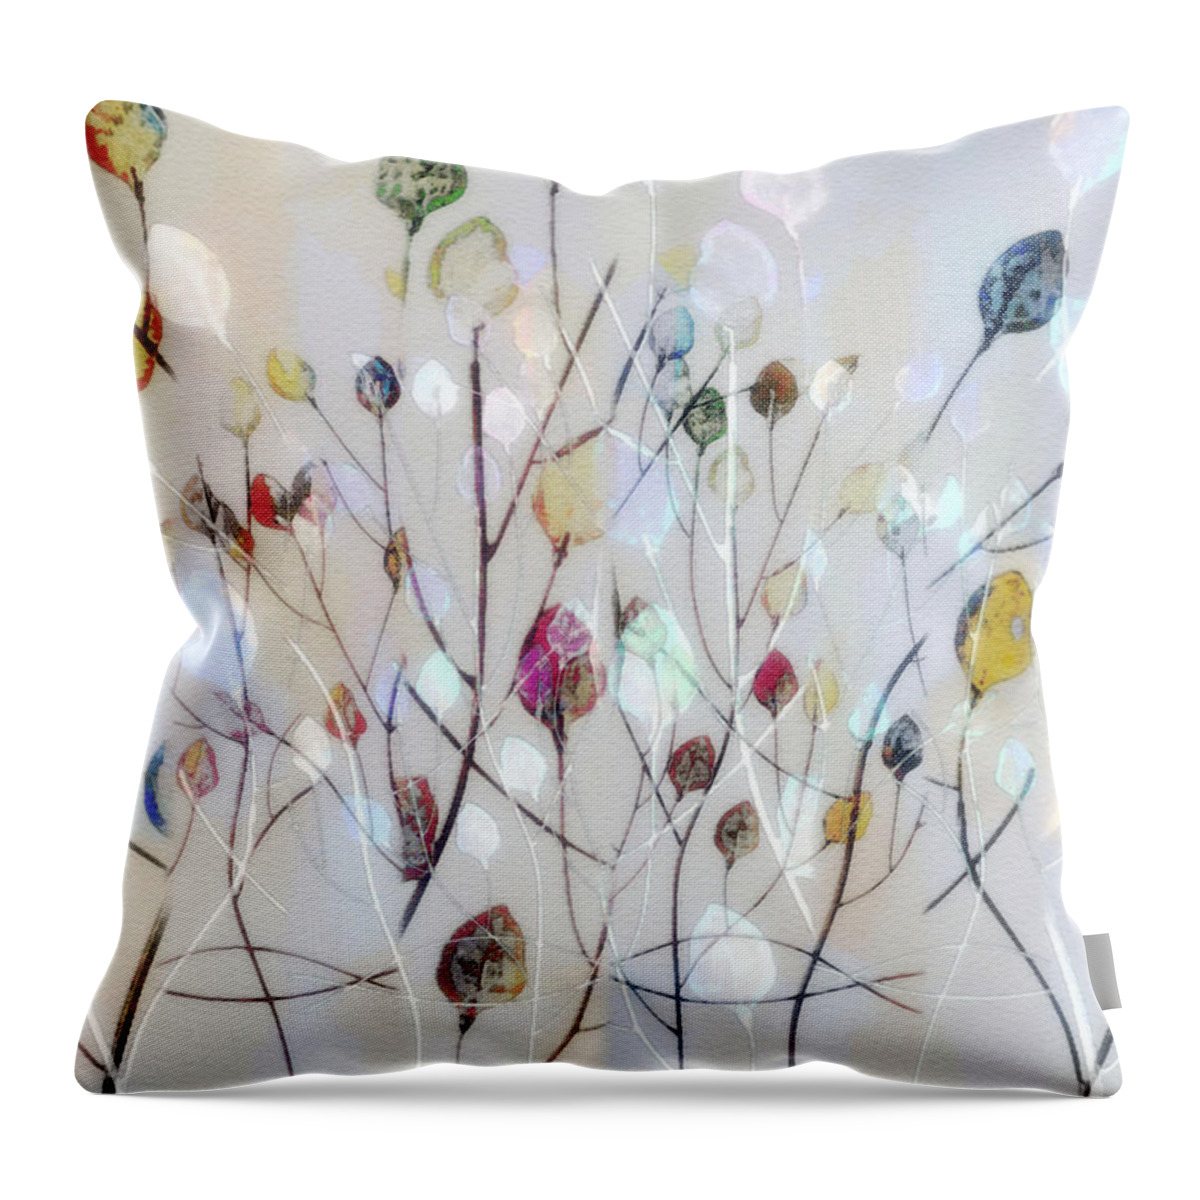 Leaves Throw Pillow featuring the digital art Leaves of Color by Nina Bradica